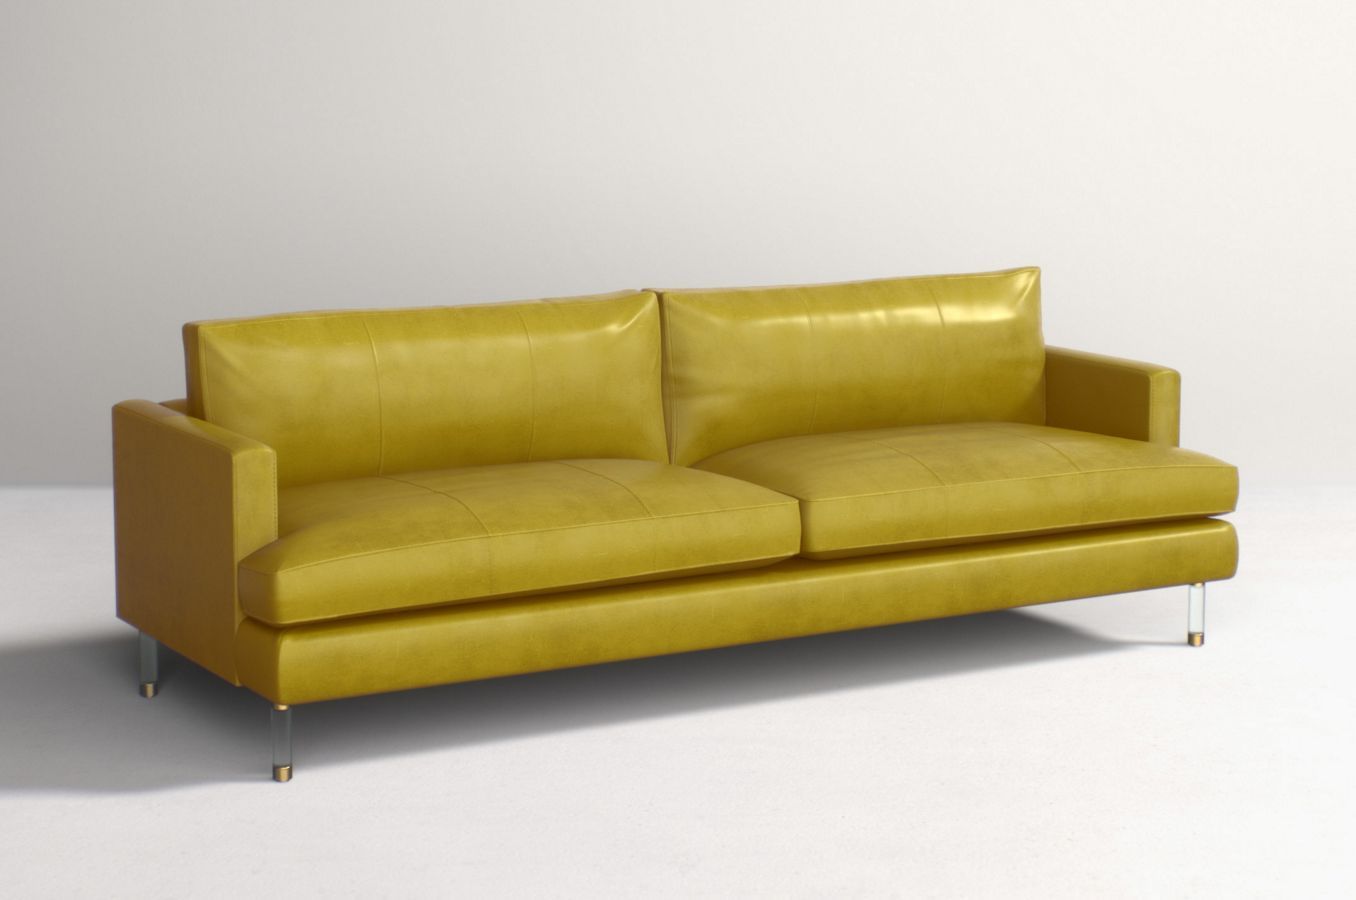 15 Best Leather Sofas To In 2020, Colorful Leather Furniture